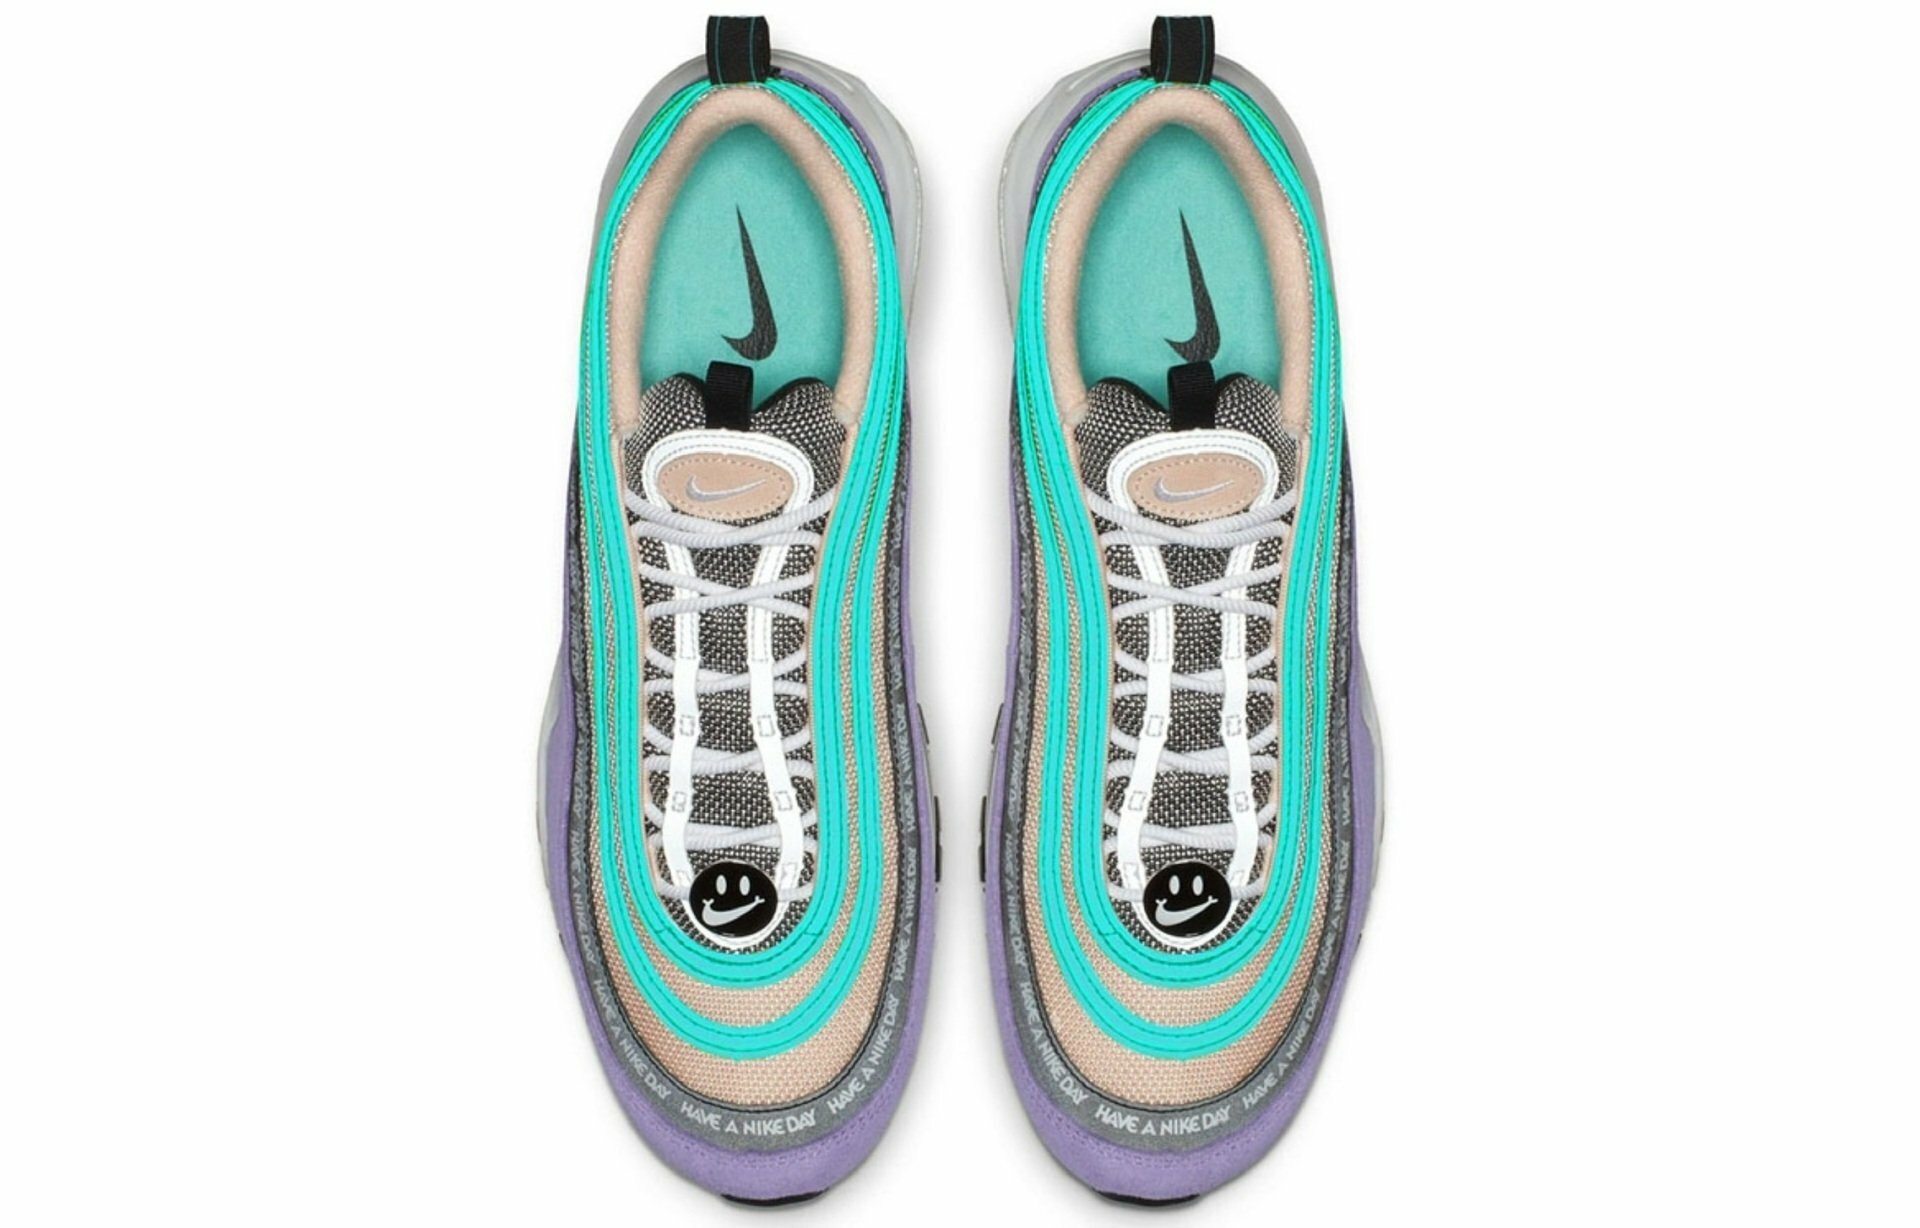 Air Max 97 "Have a Nike Day"